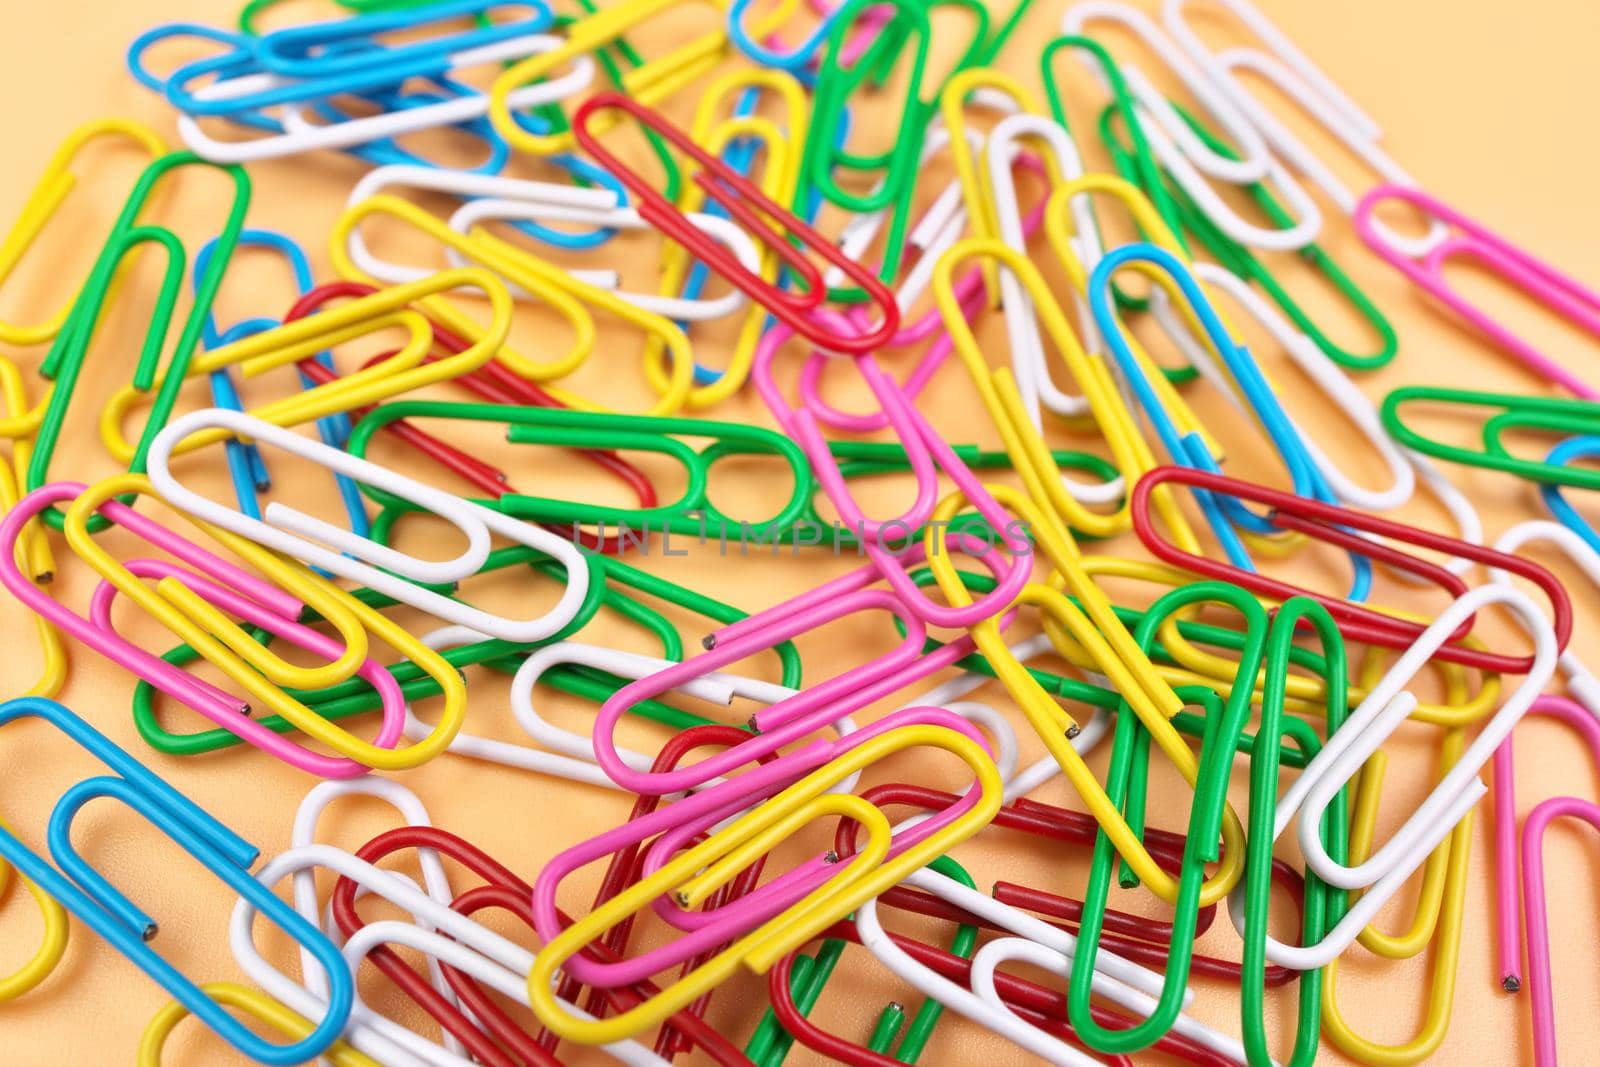 Full Frame of MultiColored Paperclips Isolated on a Cheerful Orange Beige Background by markvandam